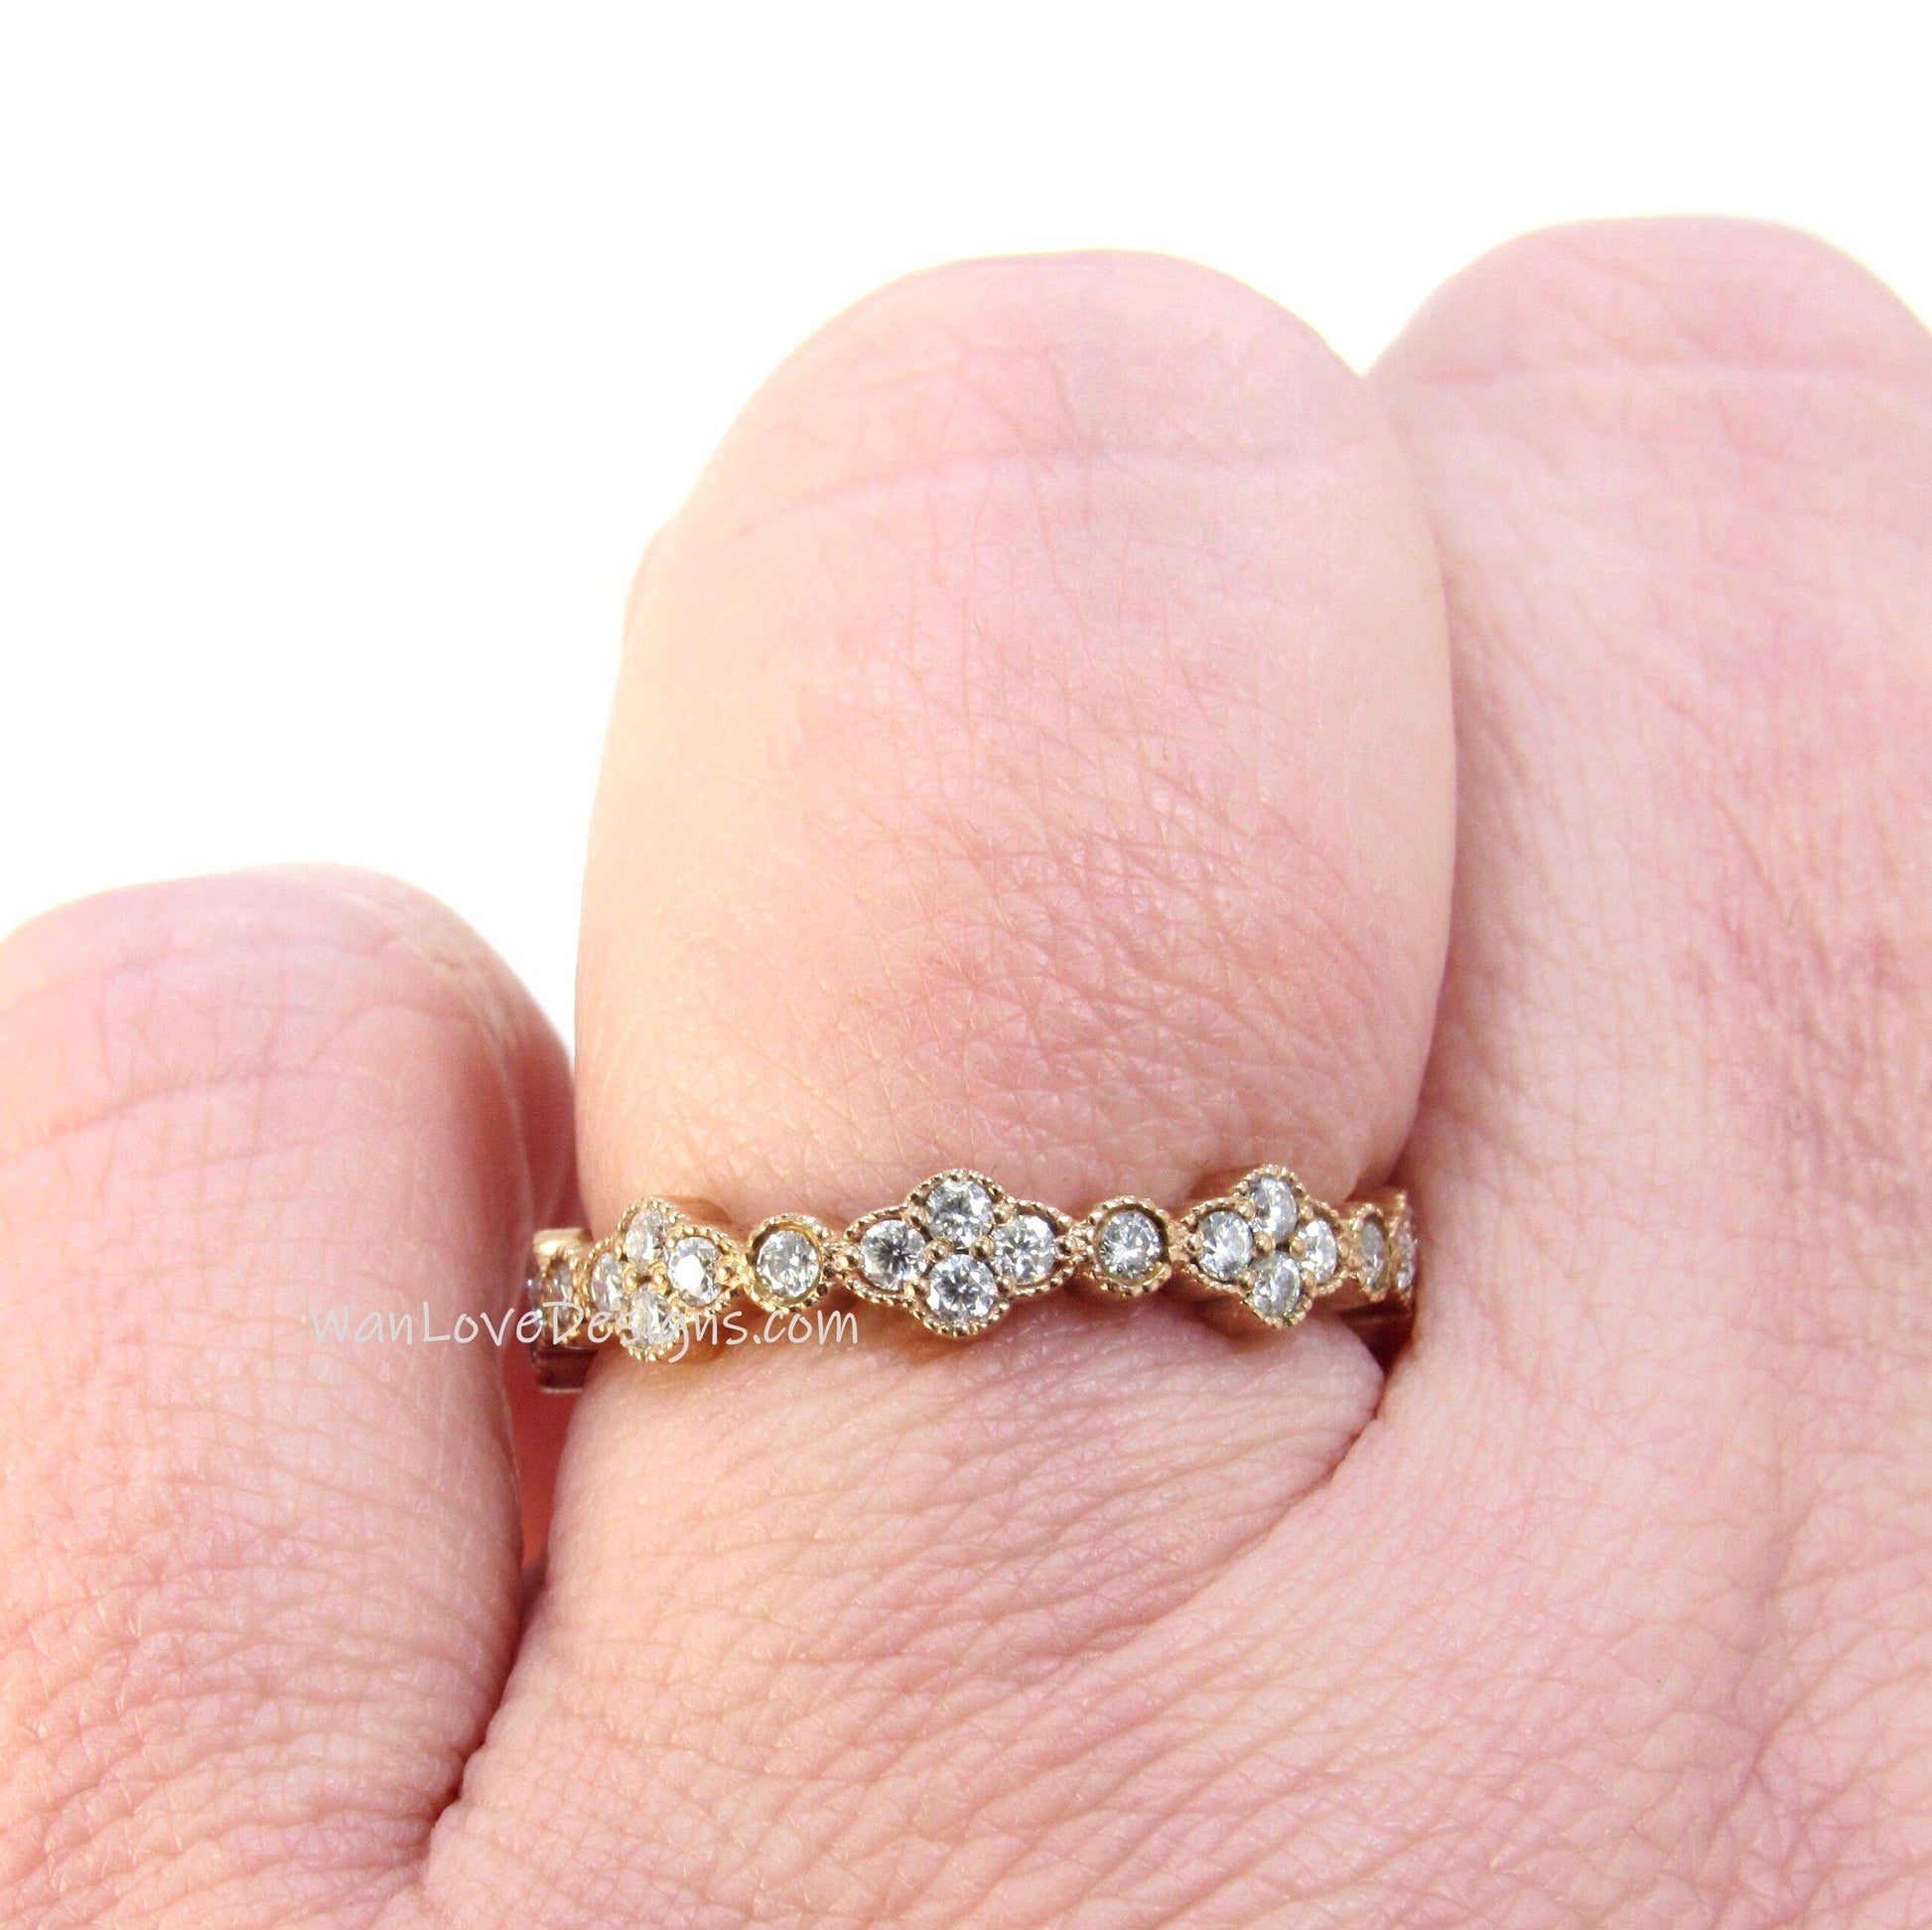 Ruby Diamond 4 Leaf Clover Almost Eternity Ring • Quatrefoil Diamond Round 3/4 Eternity Ring • Moissanite Bridal Ring • Wedding Gift for her Wan Love Designs